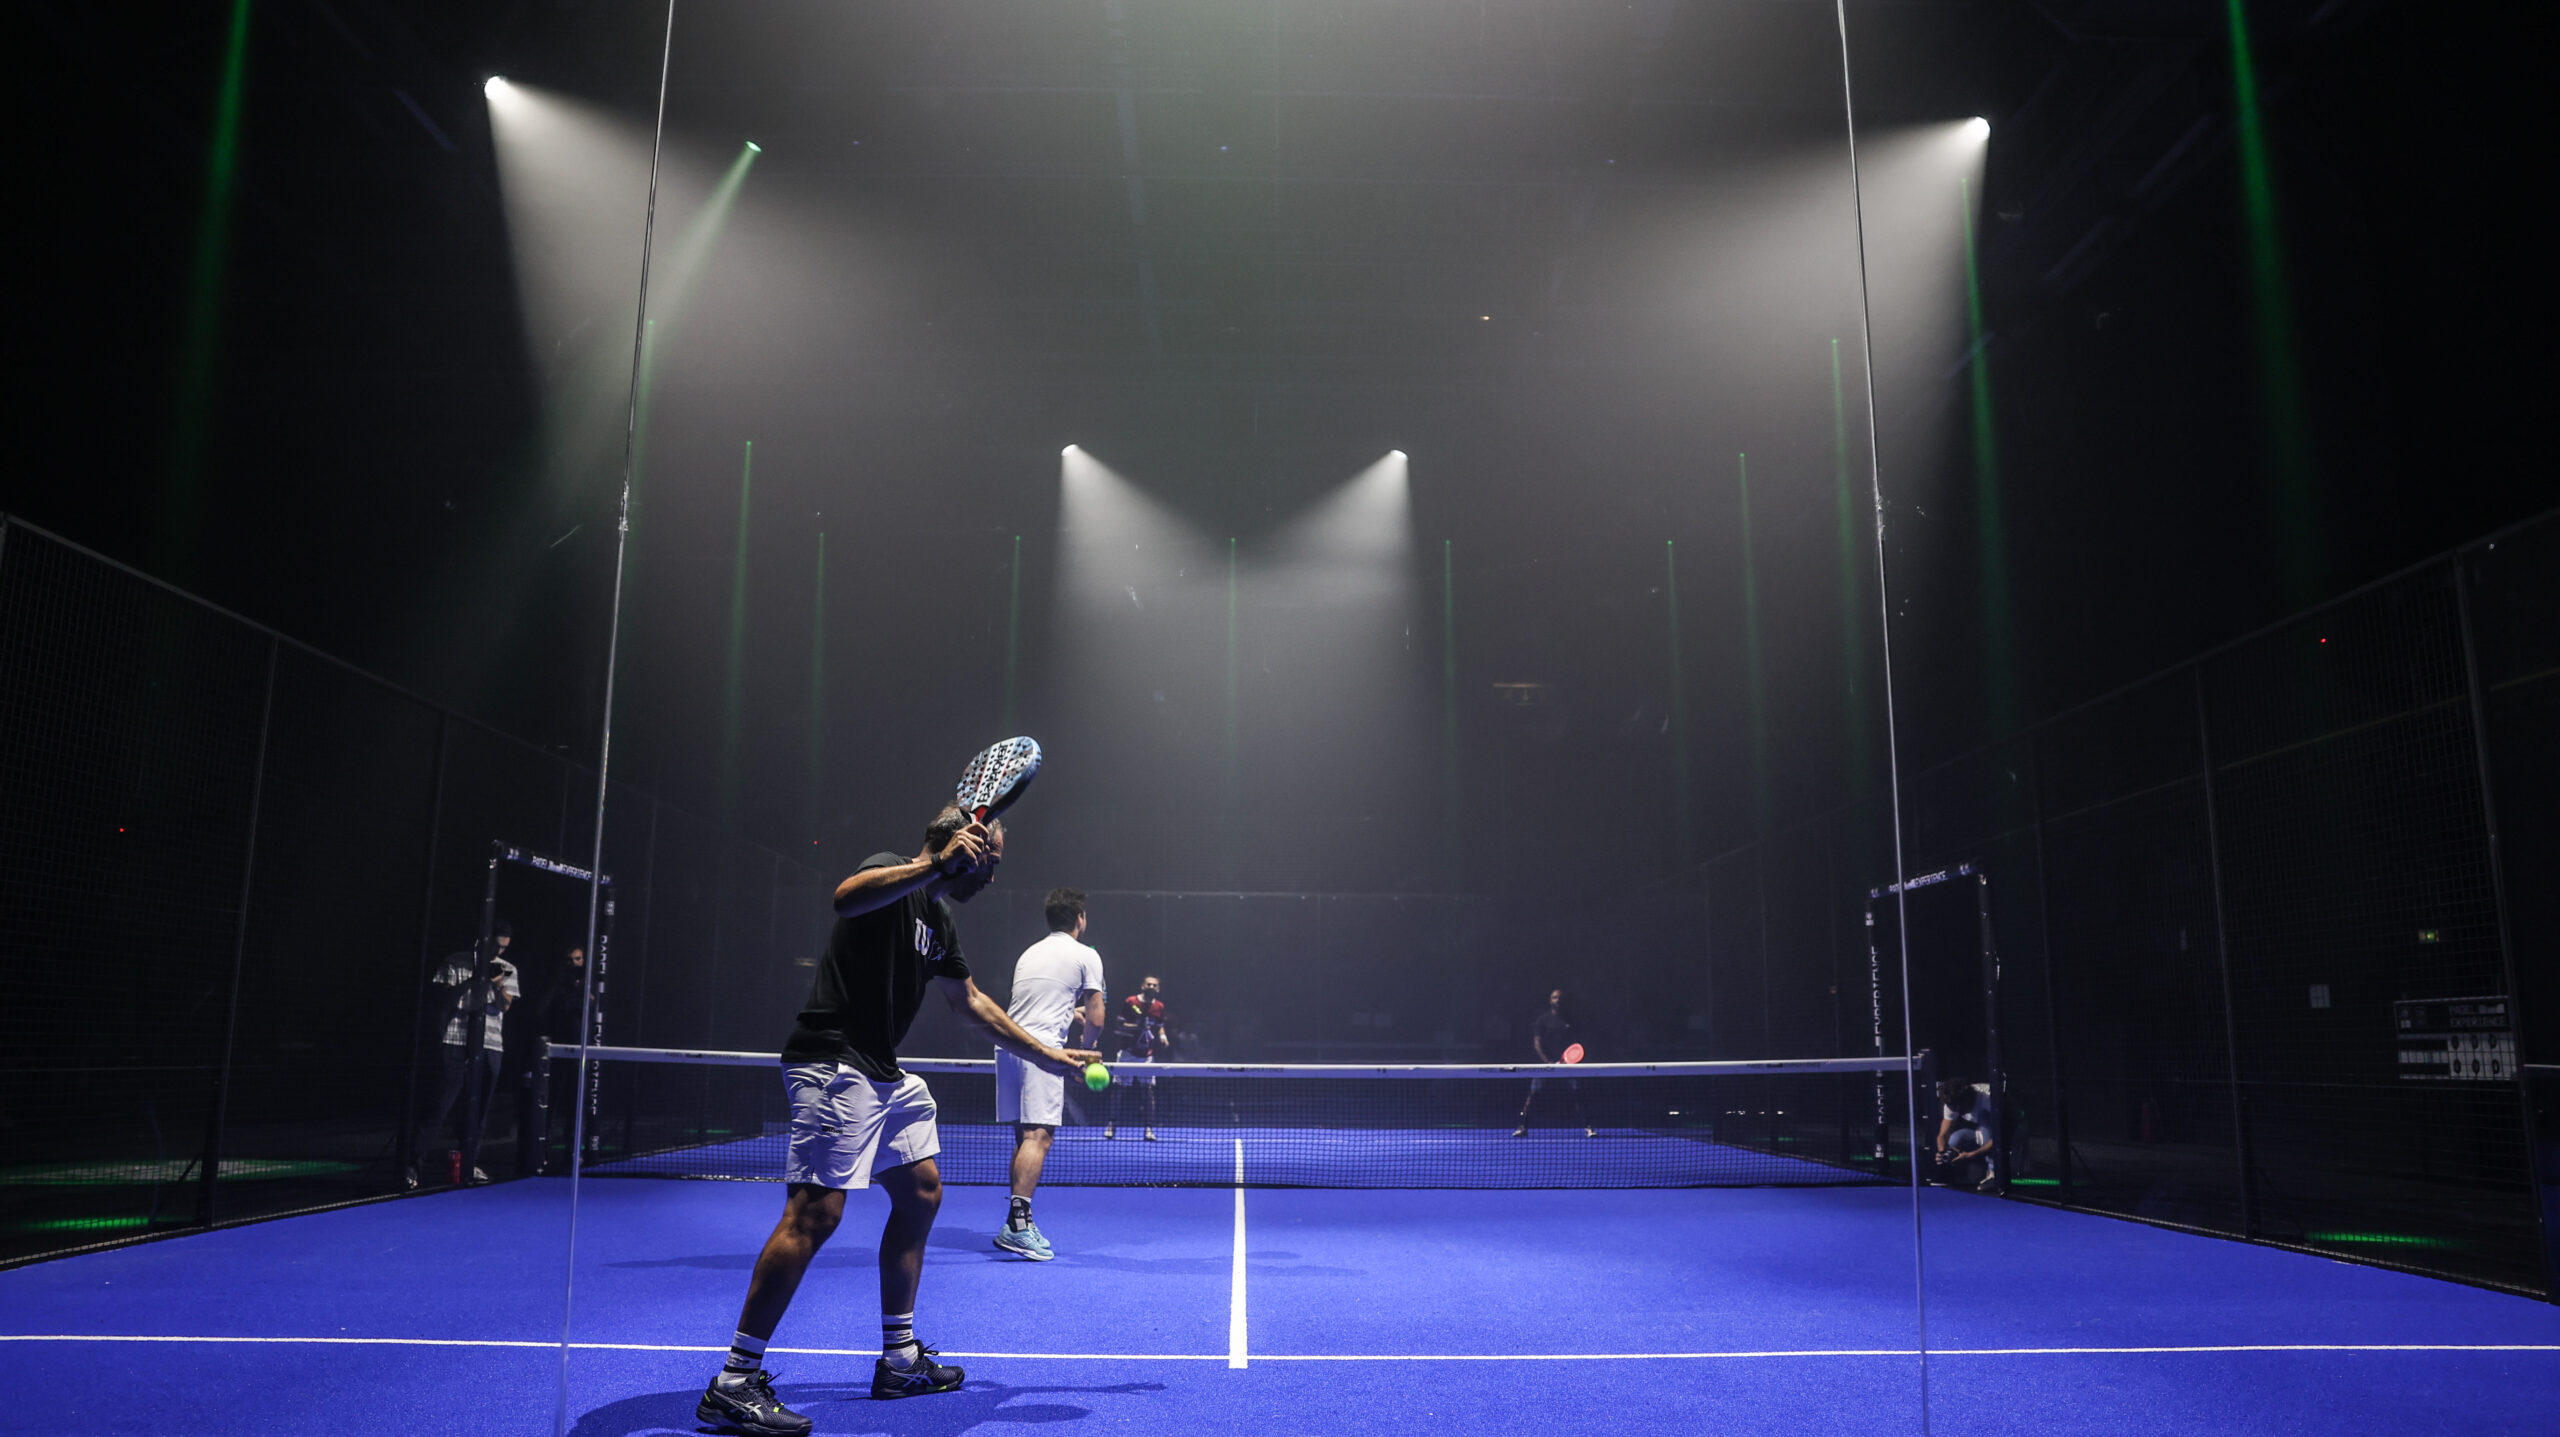 Why go to the net padel ?